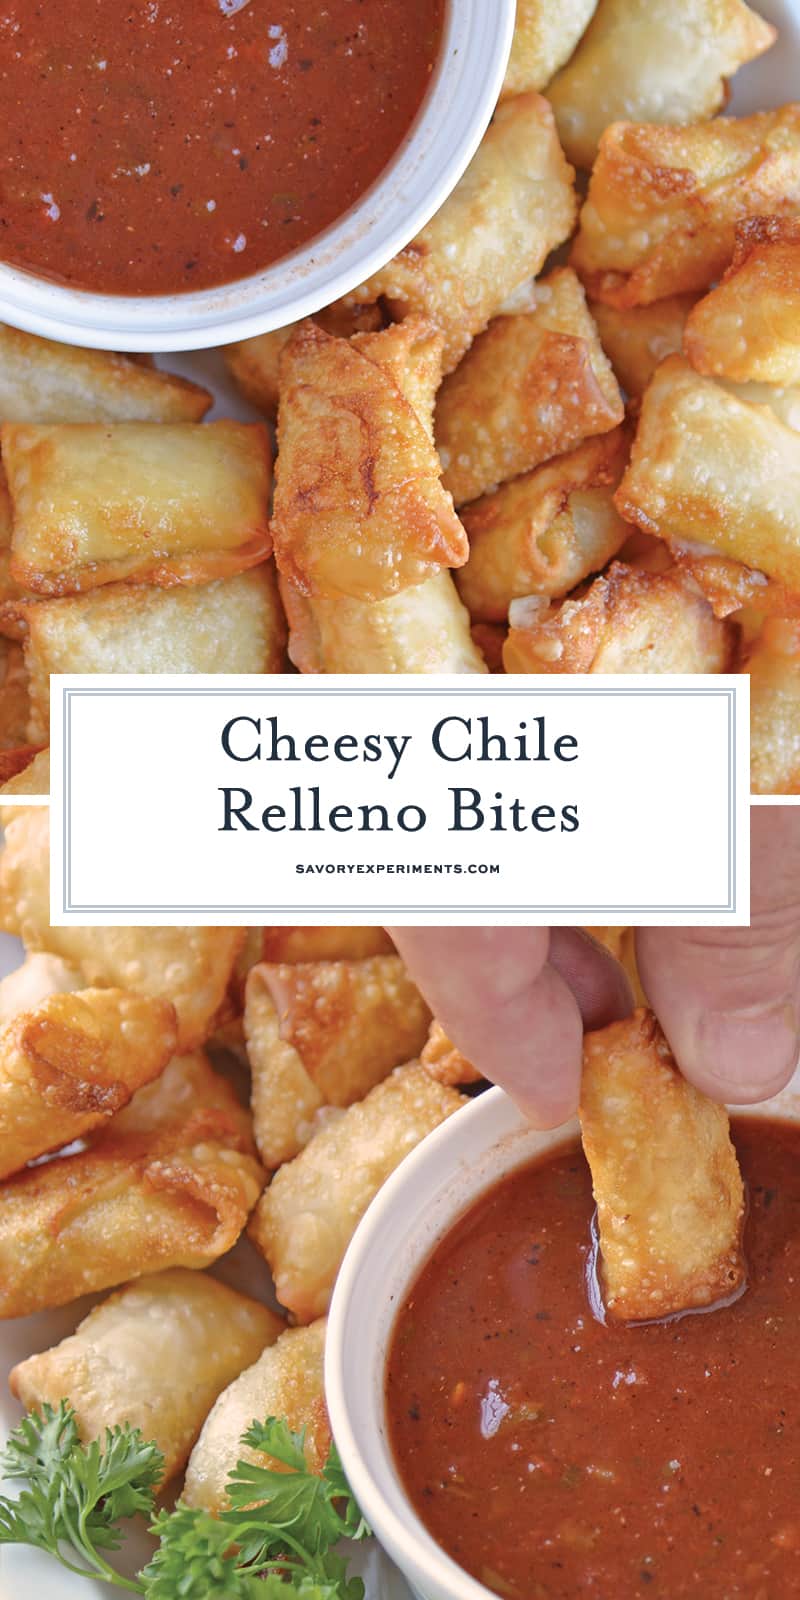 Chile Relleno Bites are a quick hack for making bite sized chile rellenos as an appetizer. Make ahead until you are ready to serve! #chilerellenobites www.savoryexperiments.com 